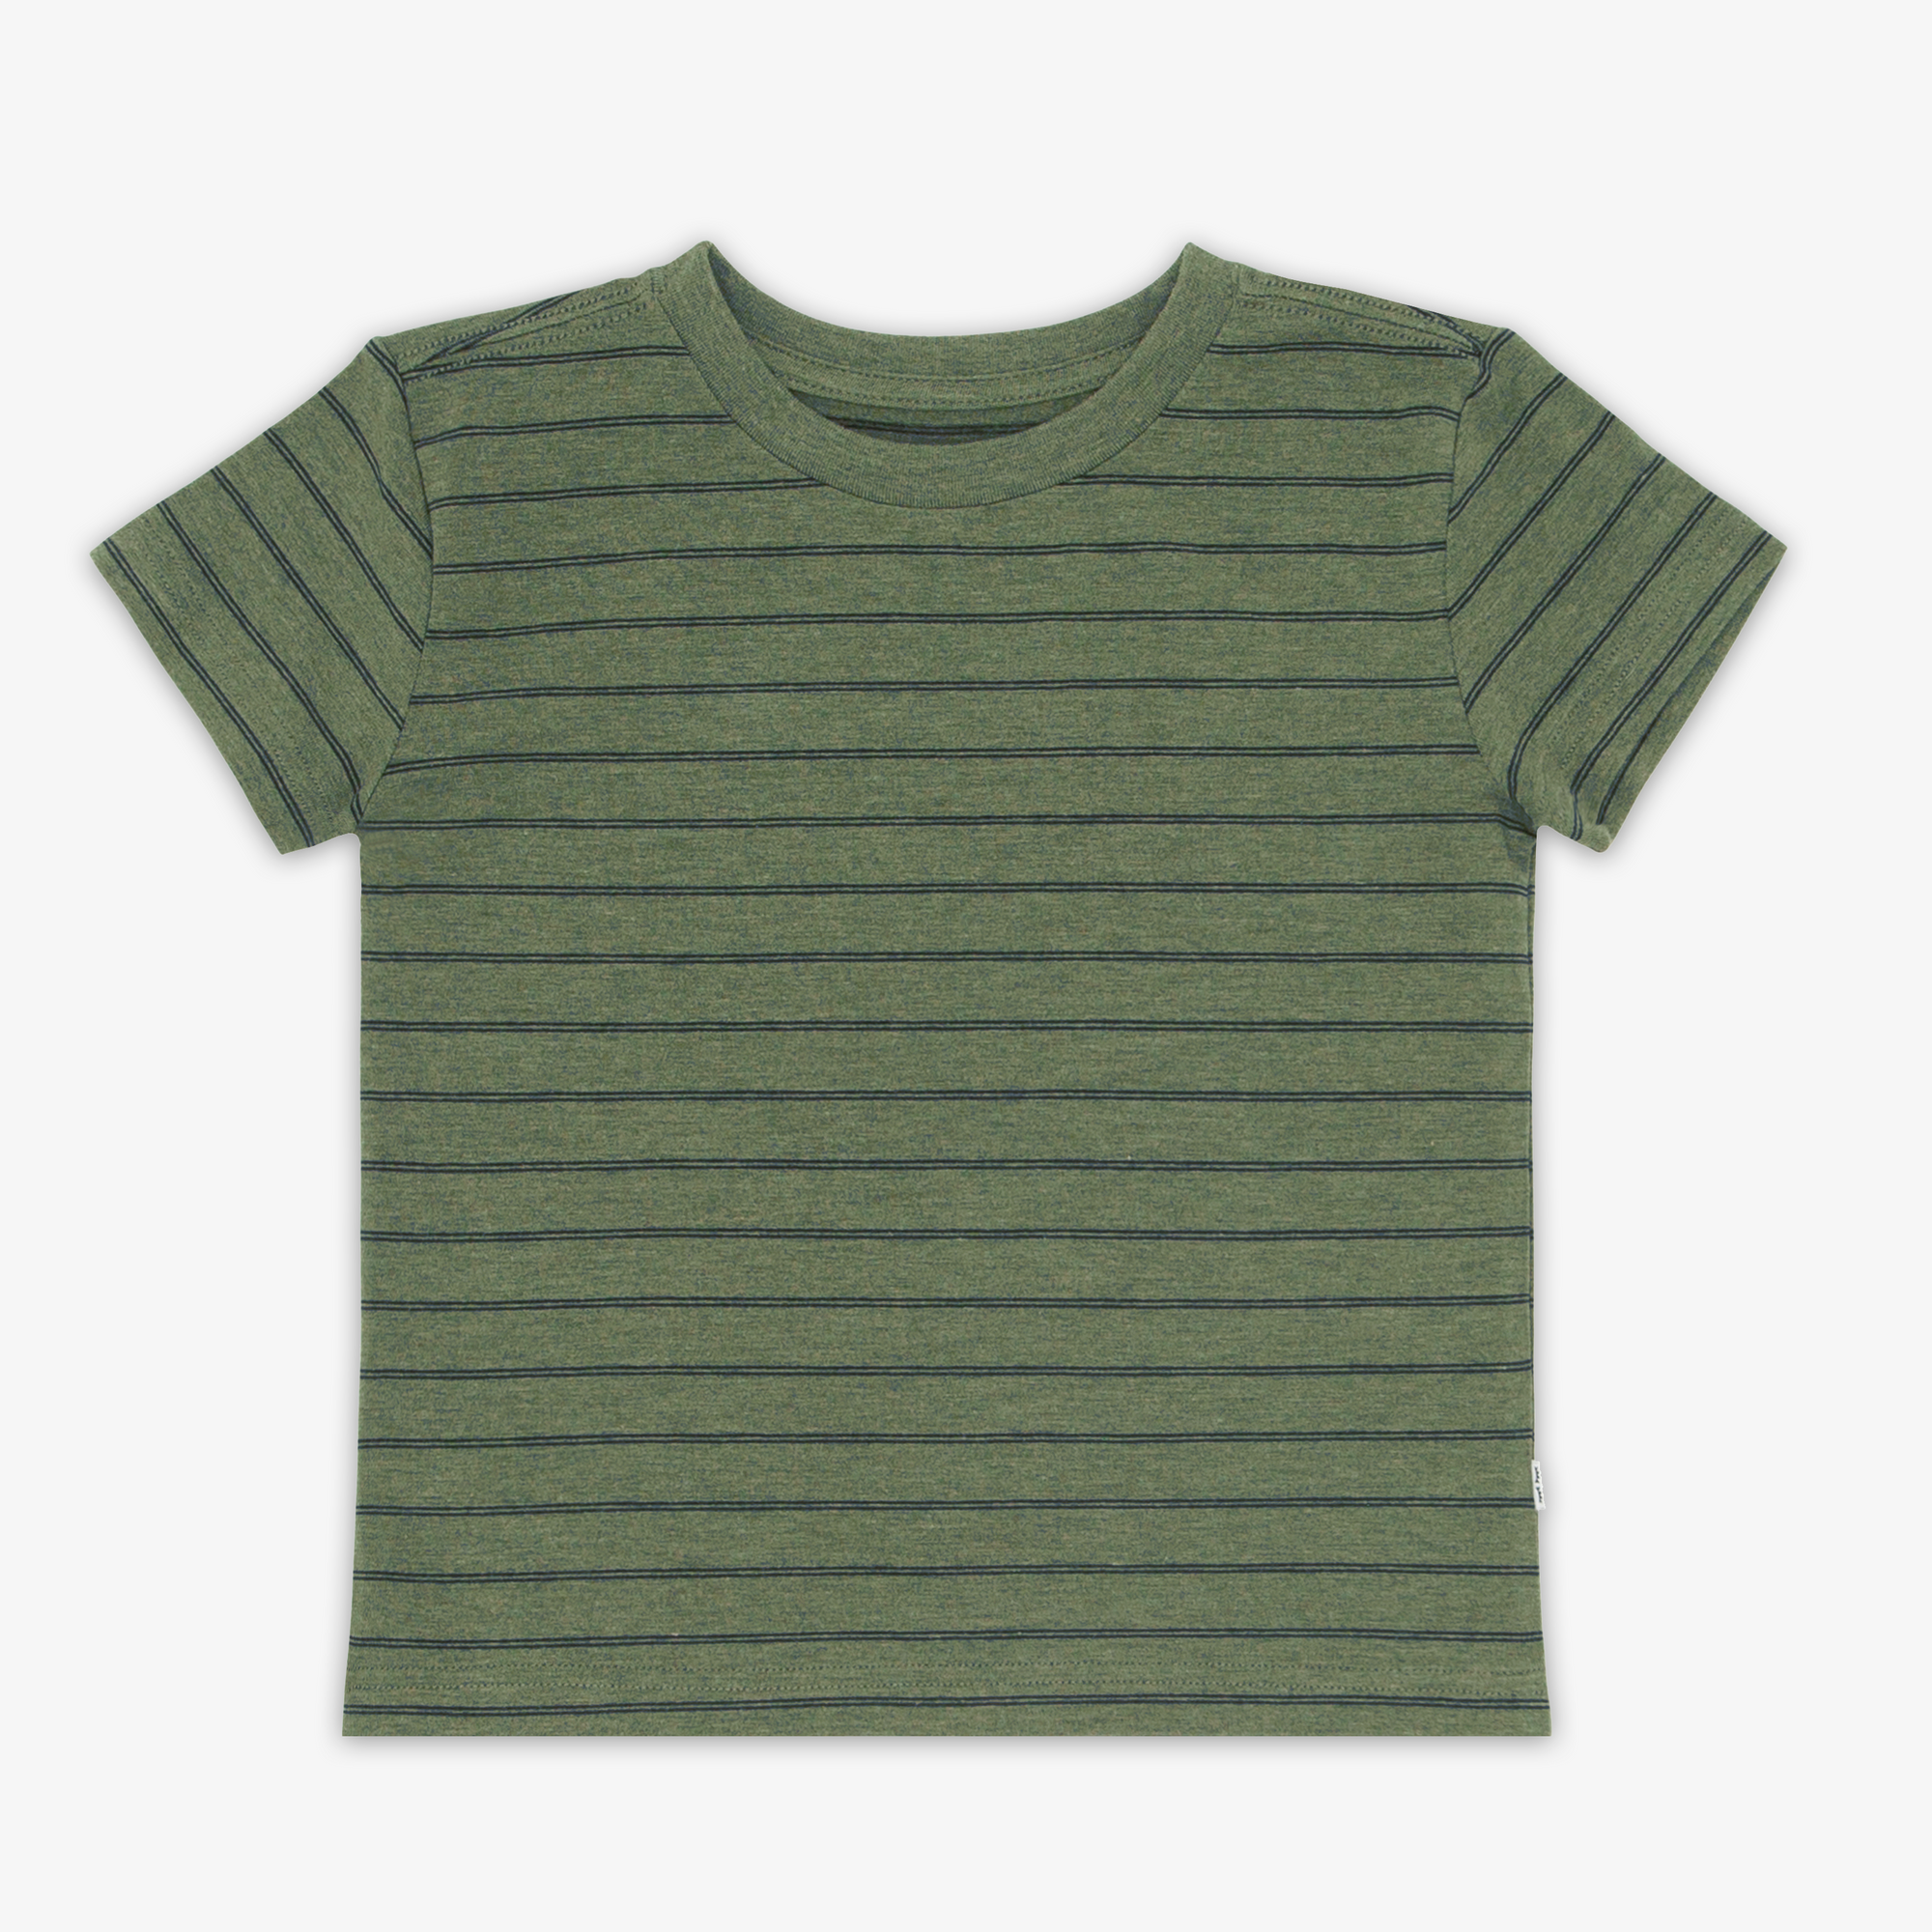 Flat lay image of the Olive Stripes Short Sleeve Relaxed Tee